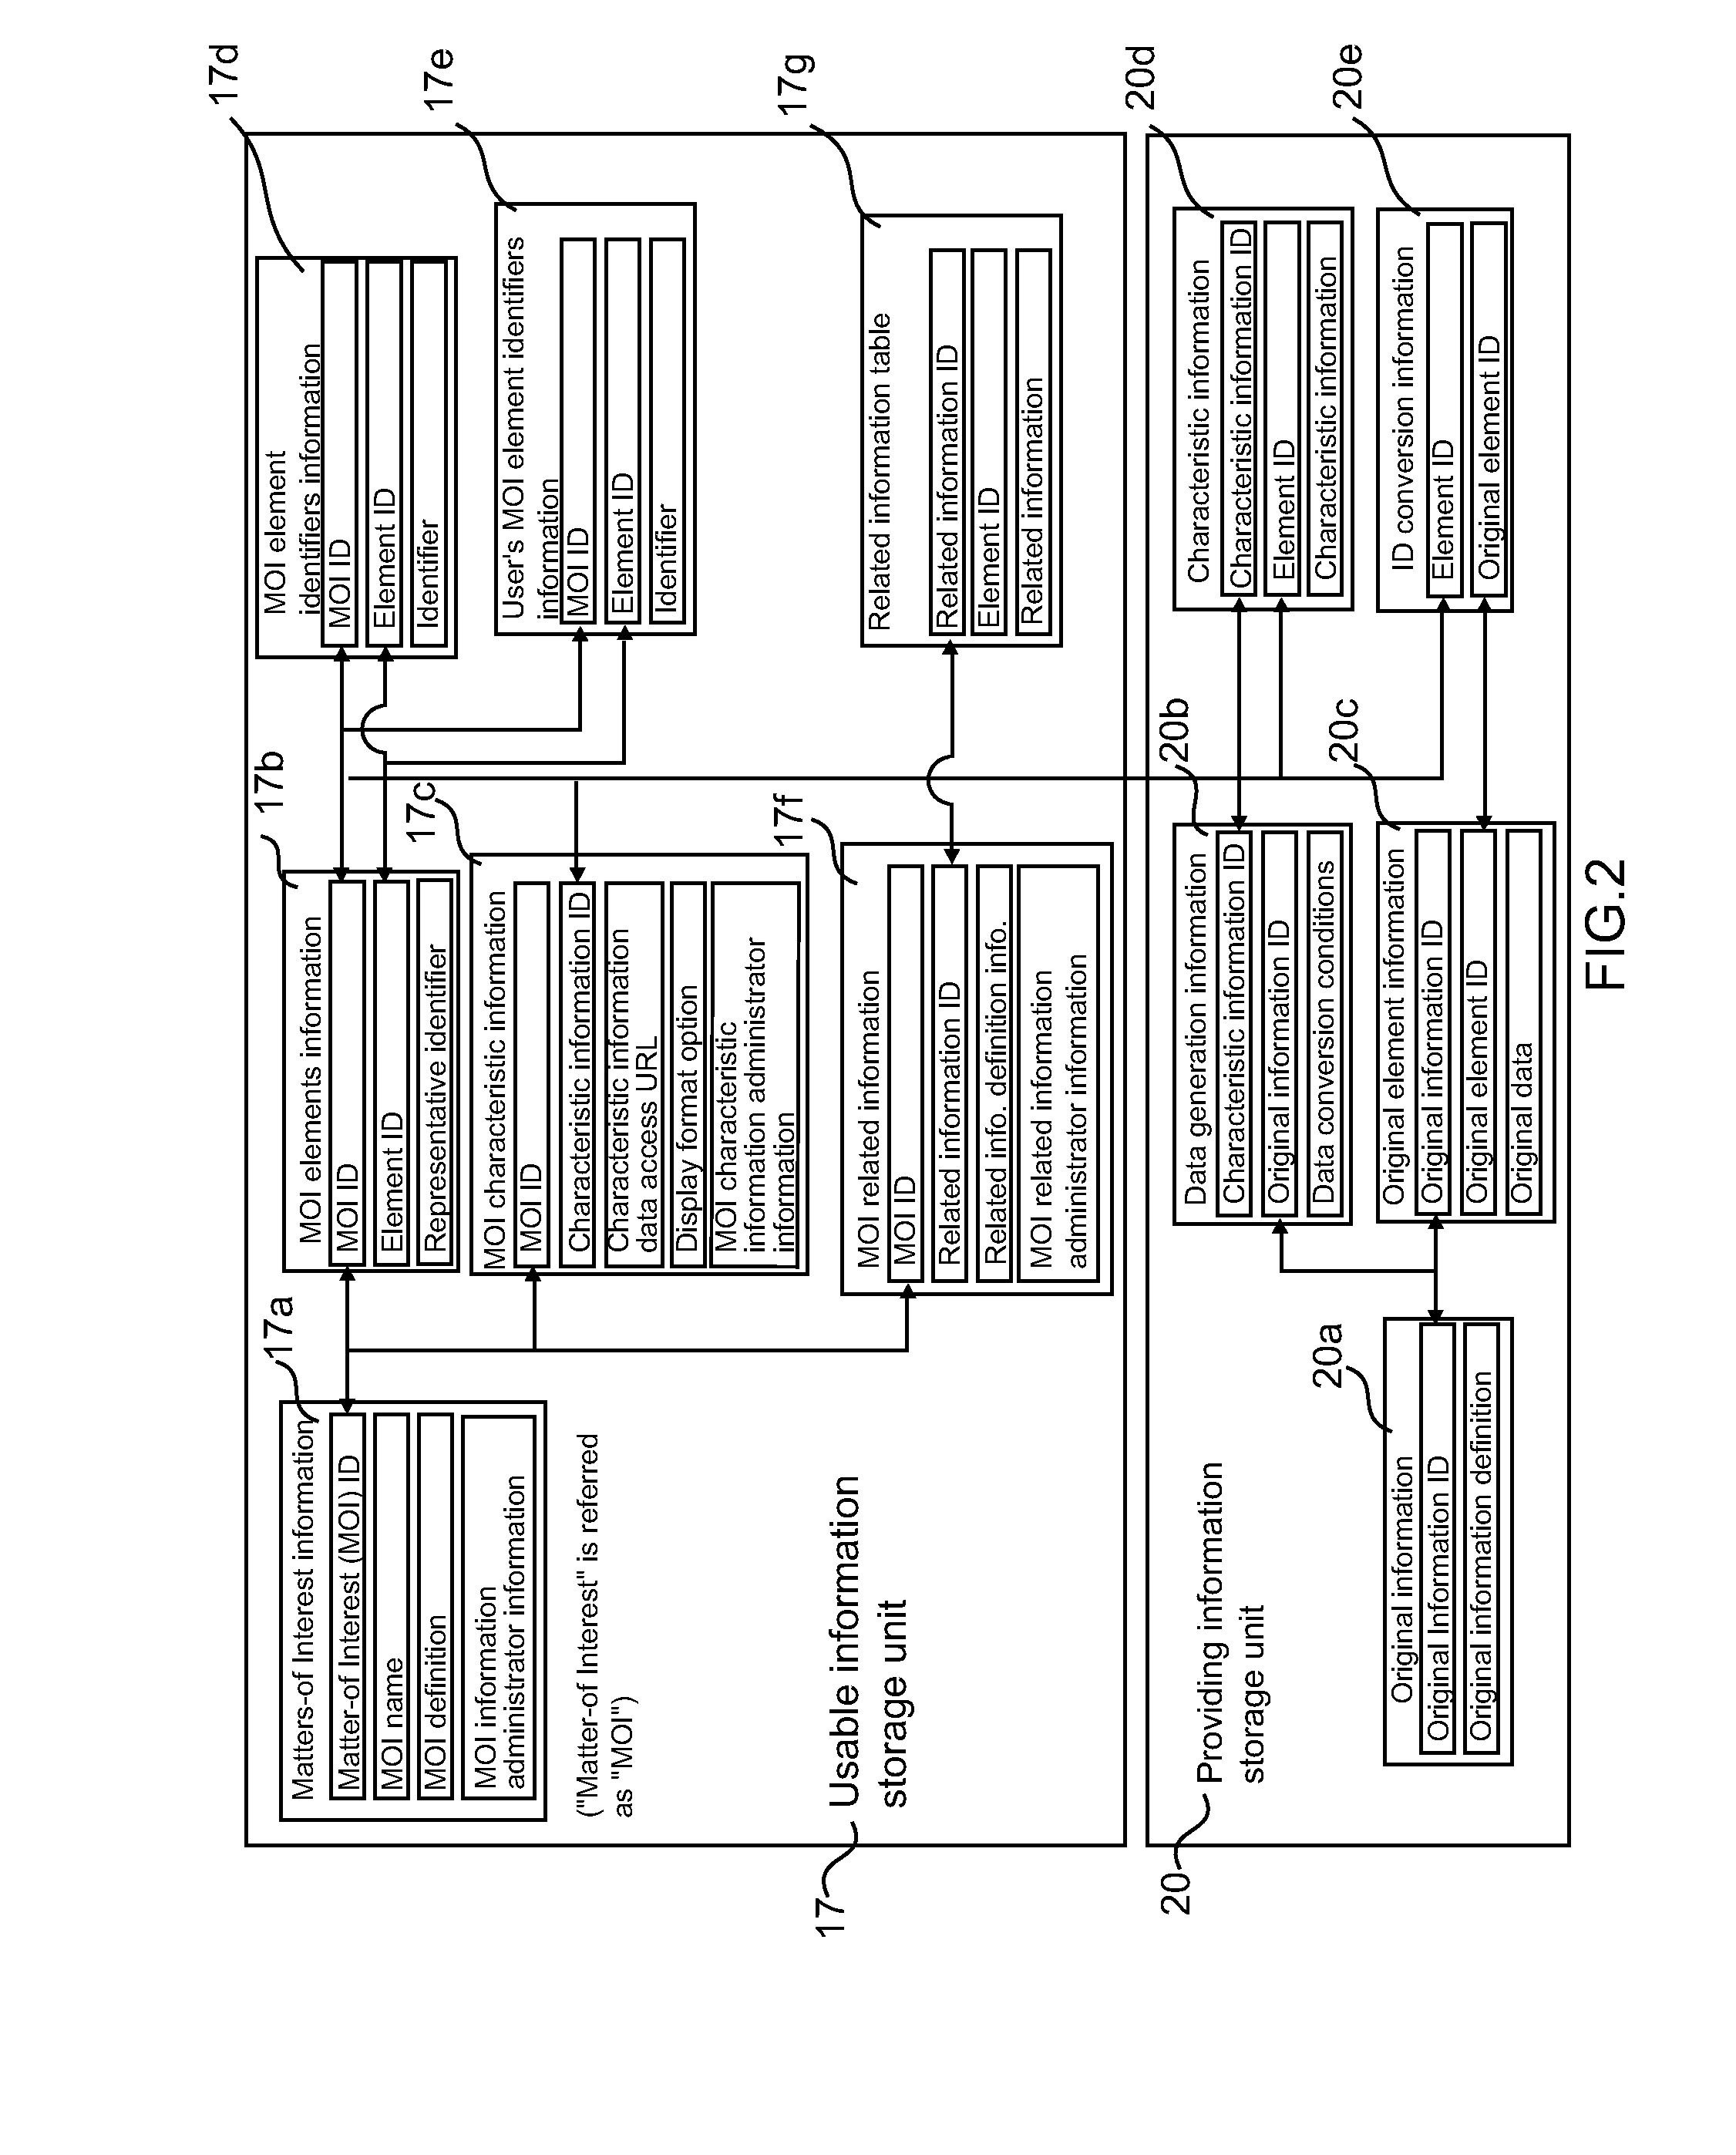 Document data display process method, document data display process system and software program for document data display process